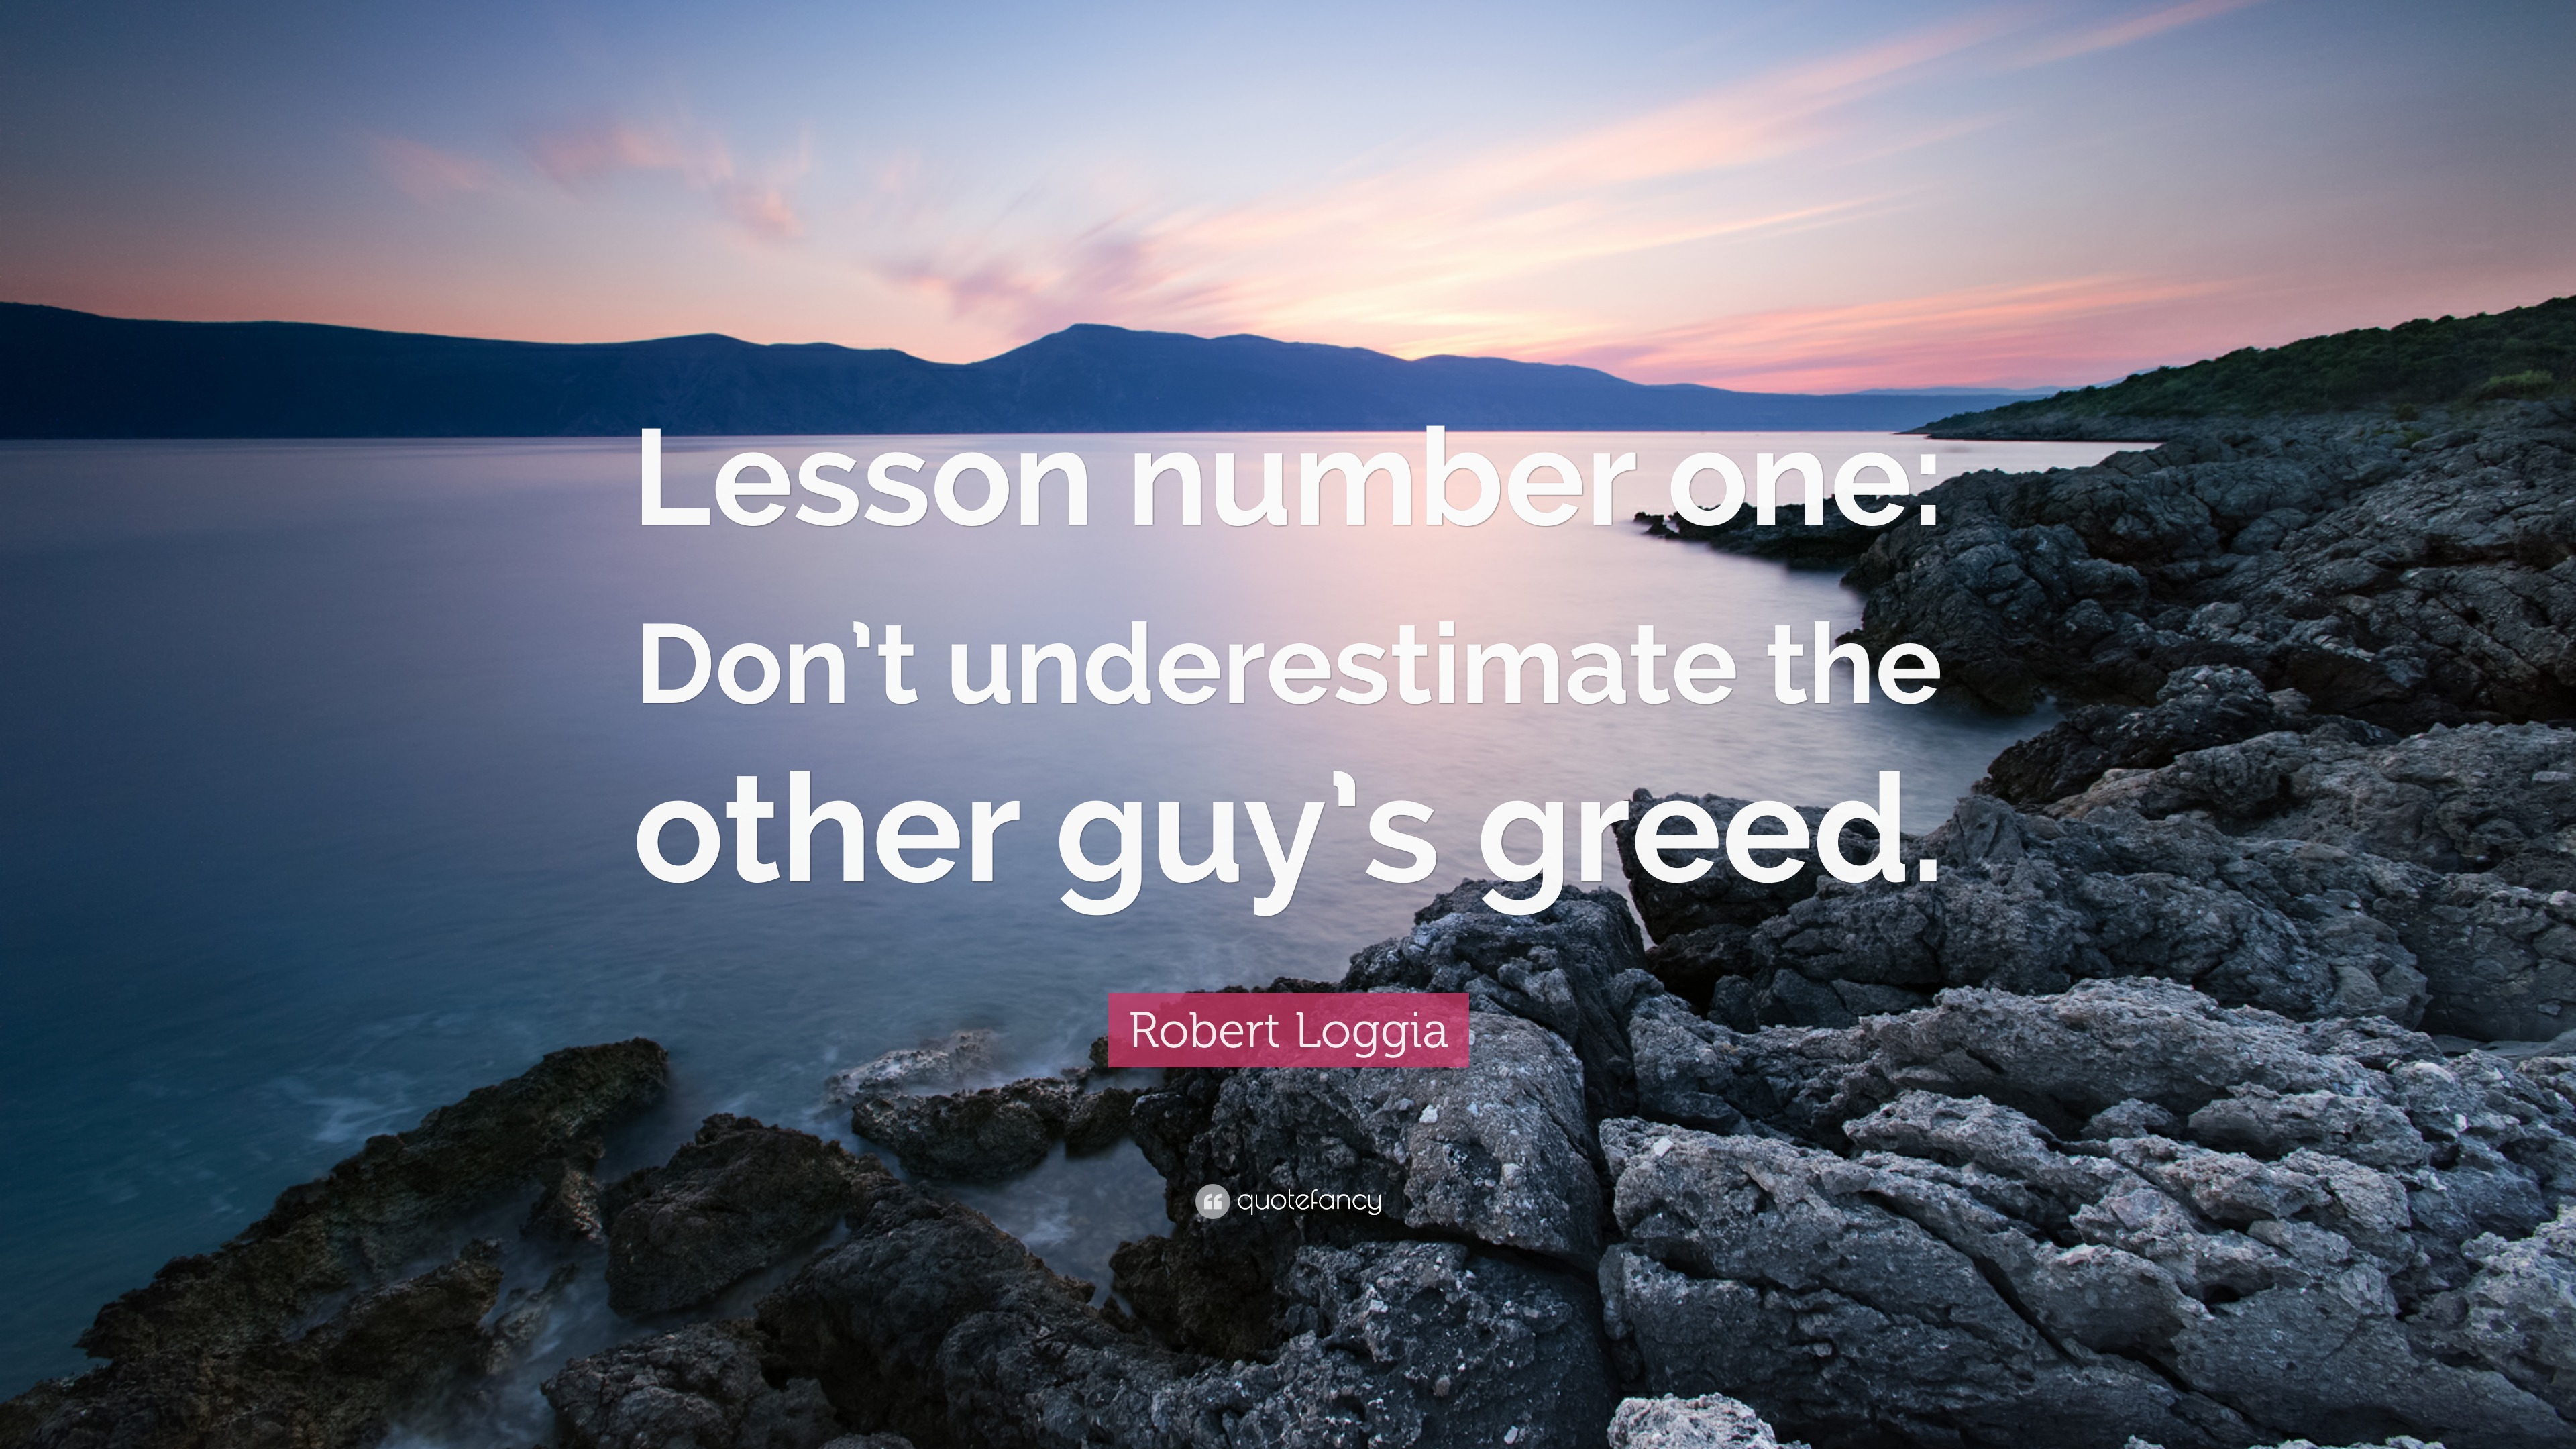 Robert Loggia Quote: “Lesson number one: Don't underestimate the other  guy's greed.”